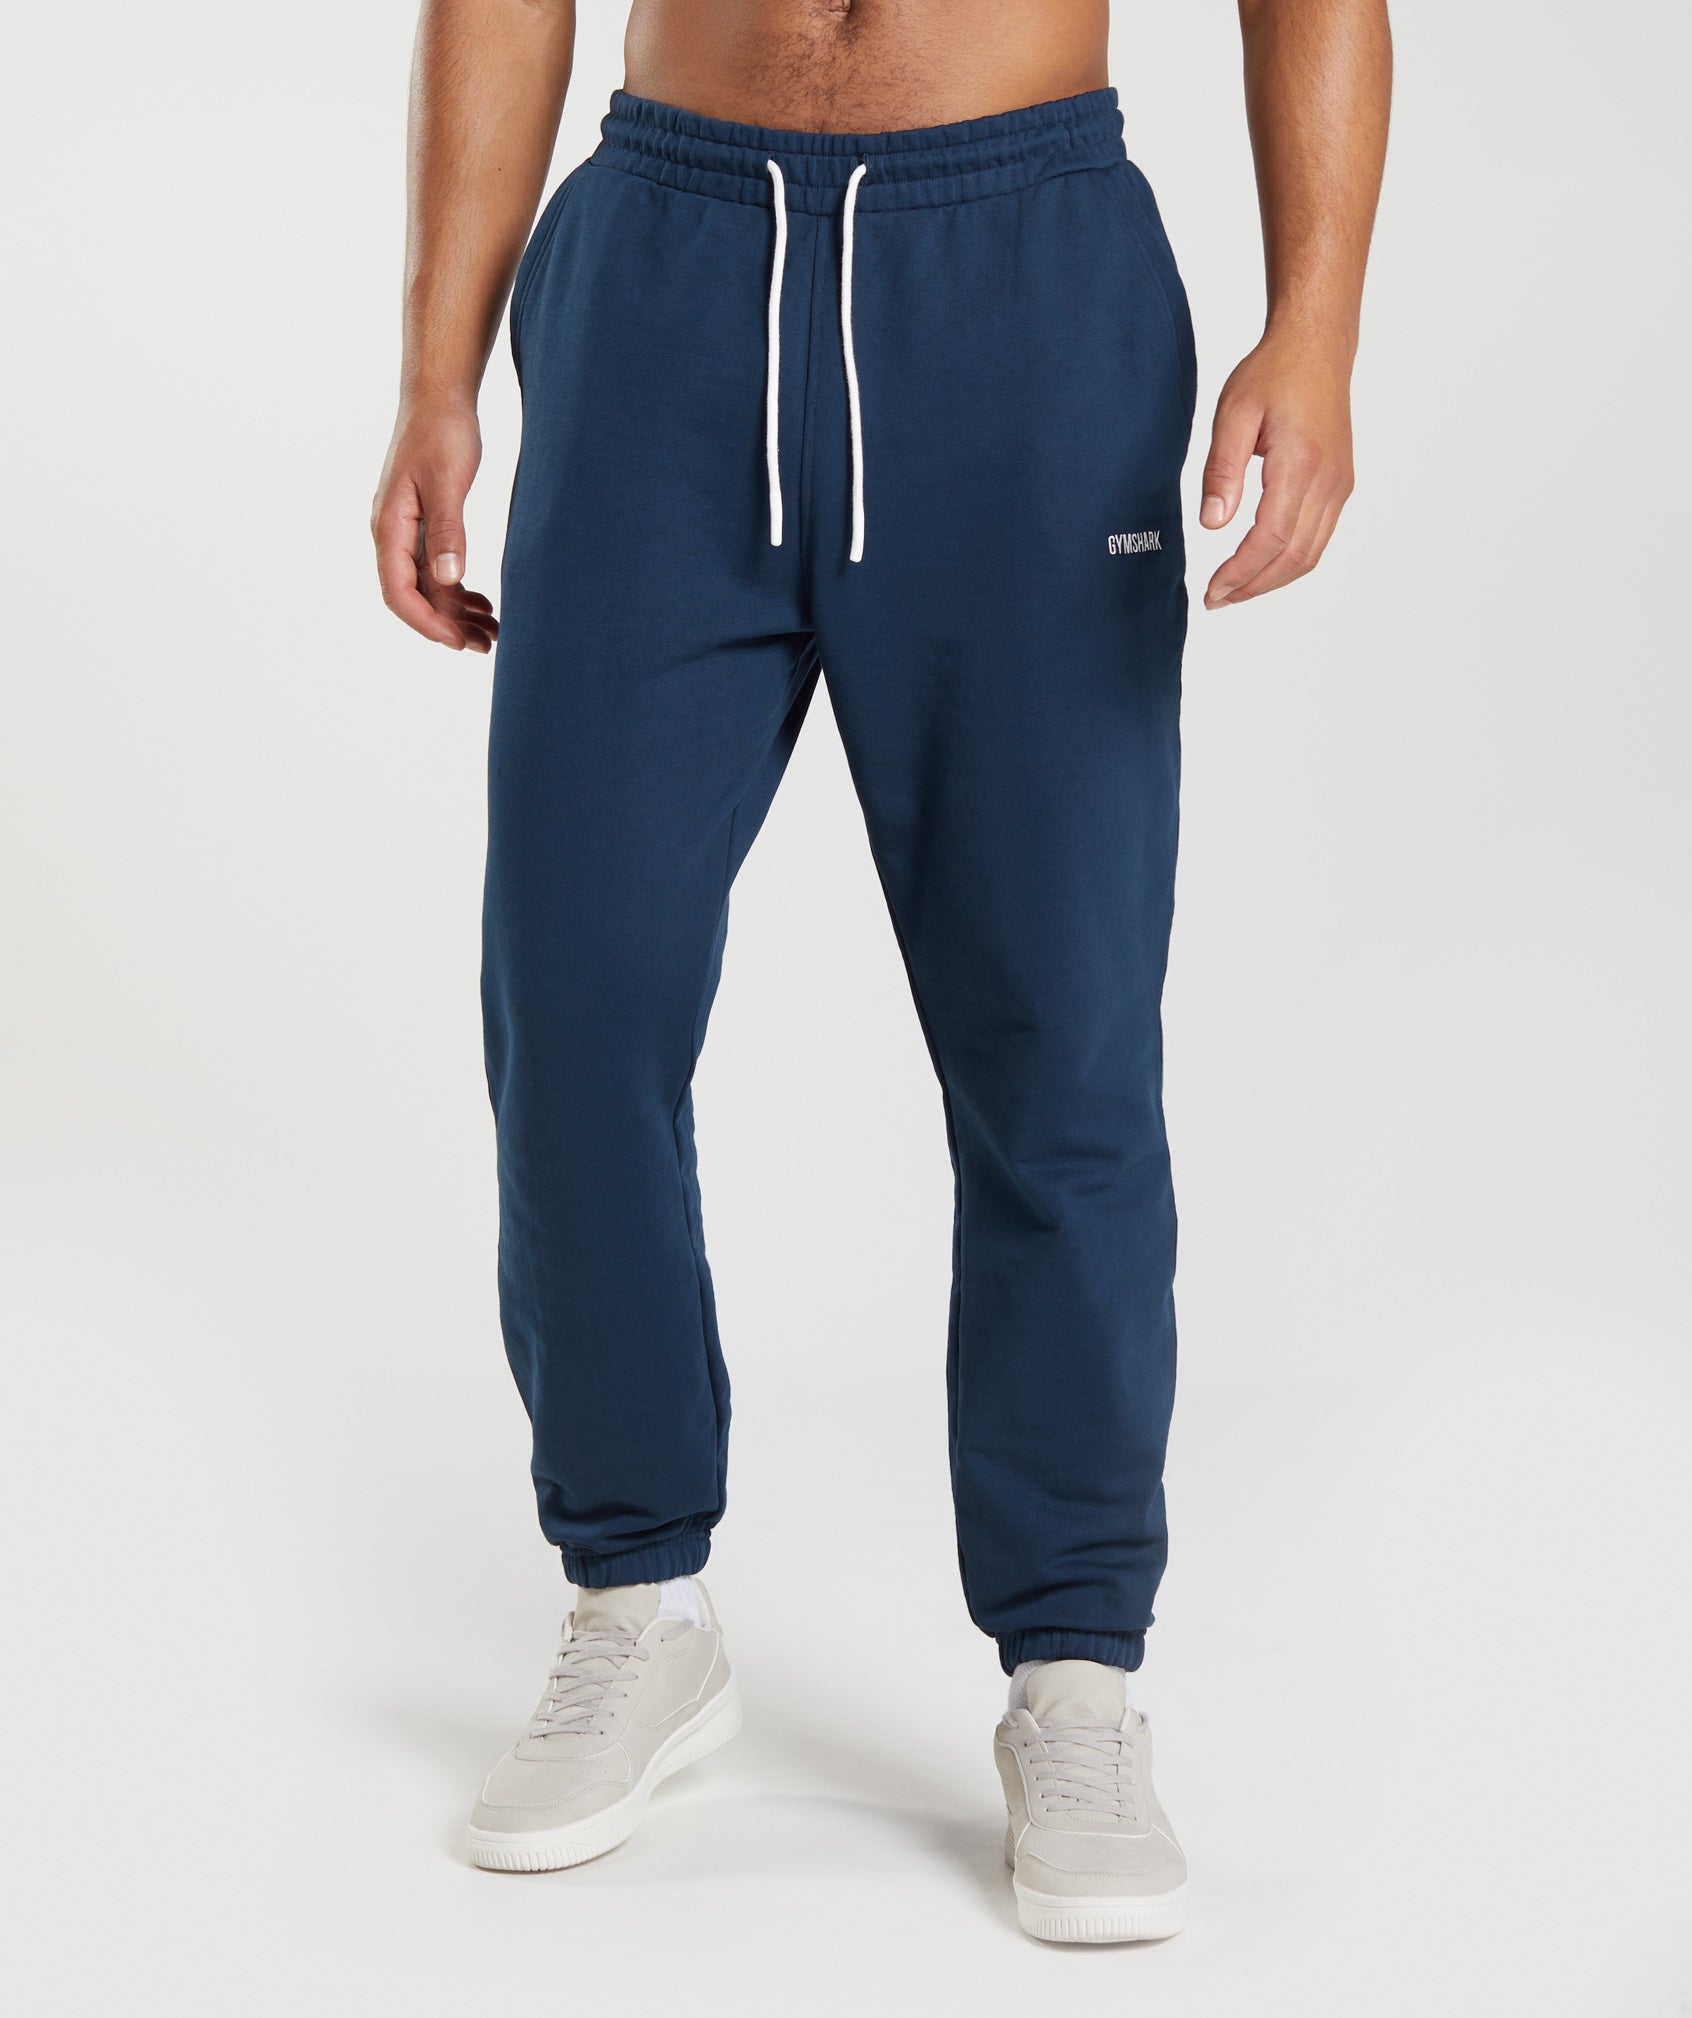 Rest Day Sweats Joggers in Navy - view 1